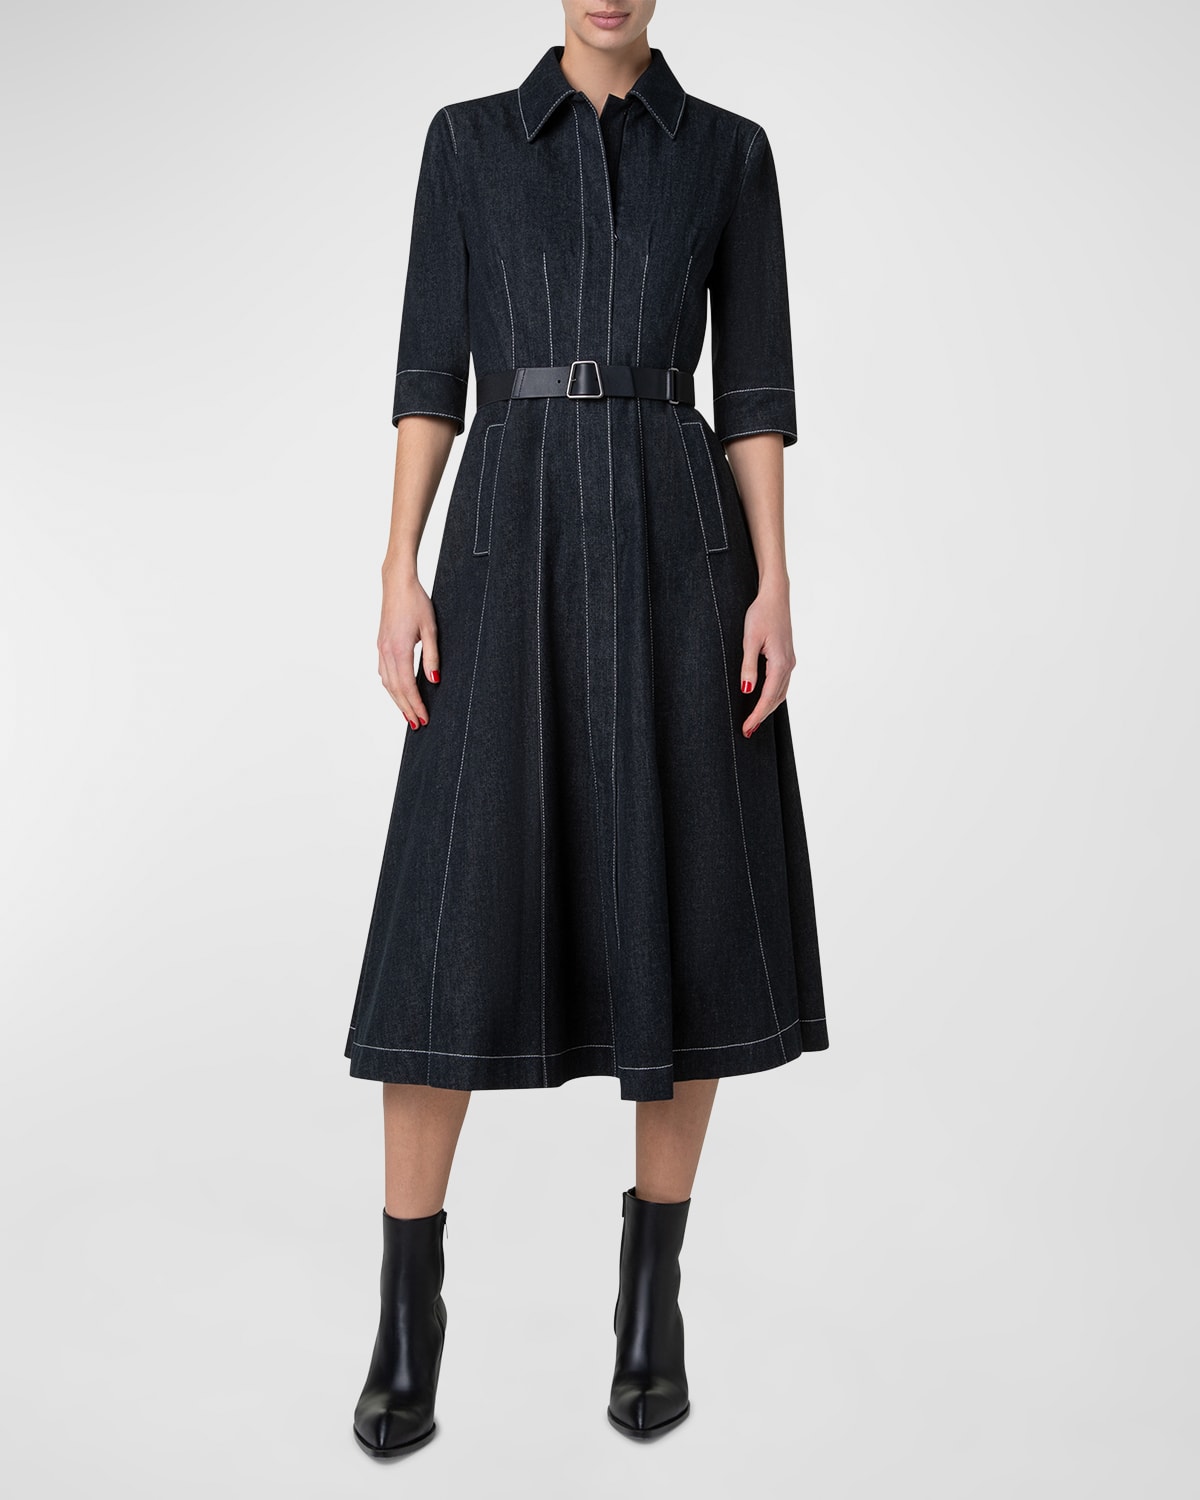 Belted Cotton Denim Midi Dress with Contrast Stitching